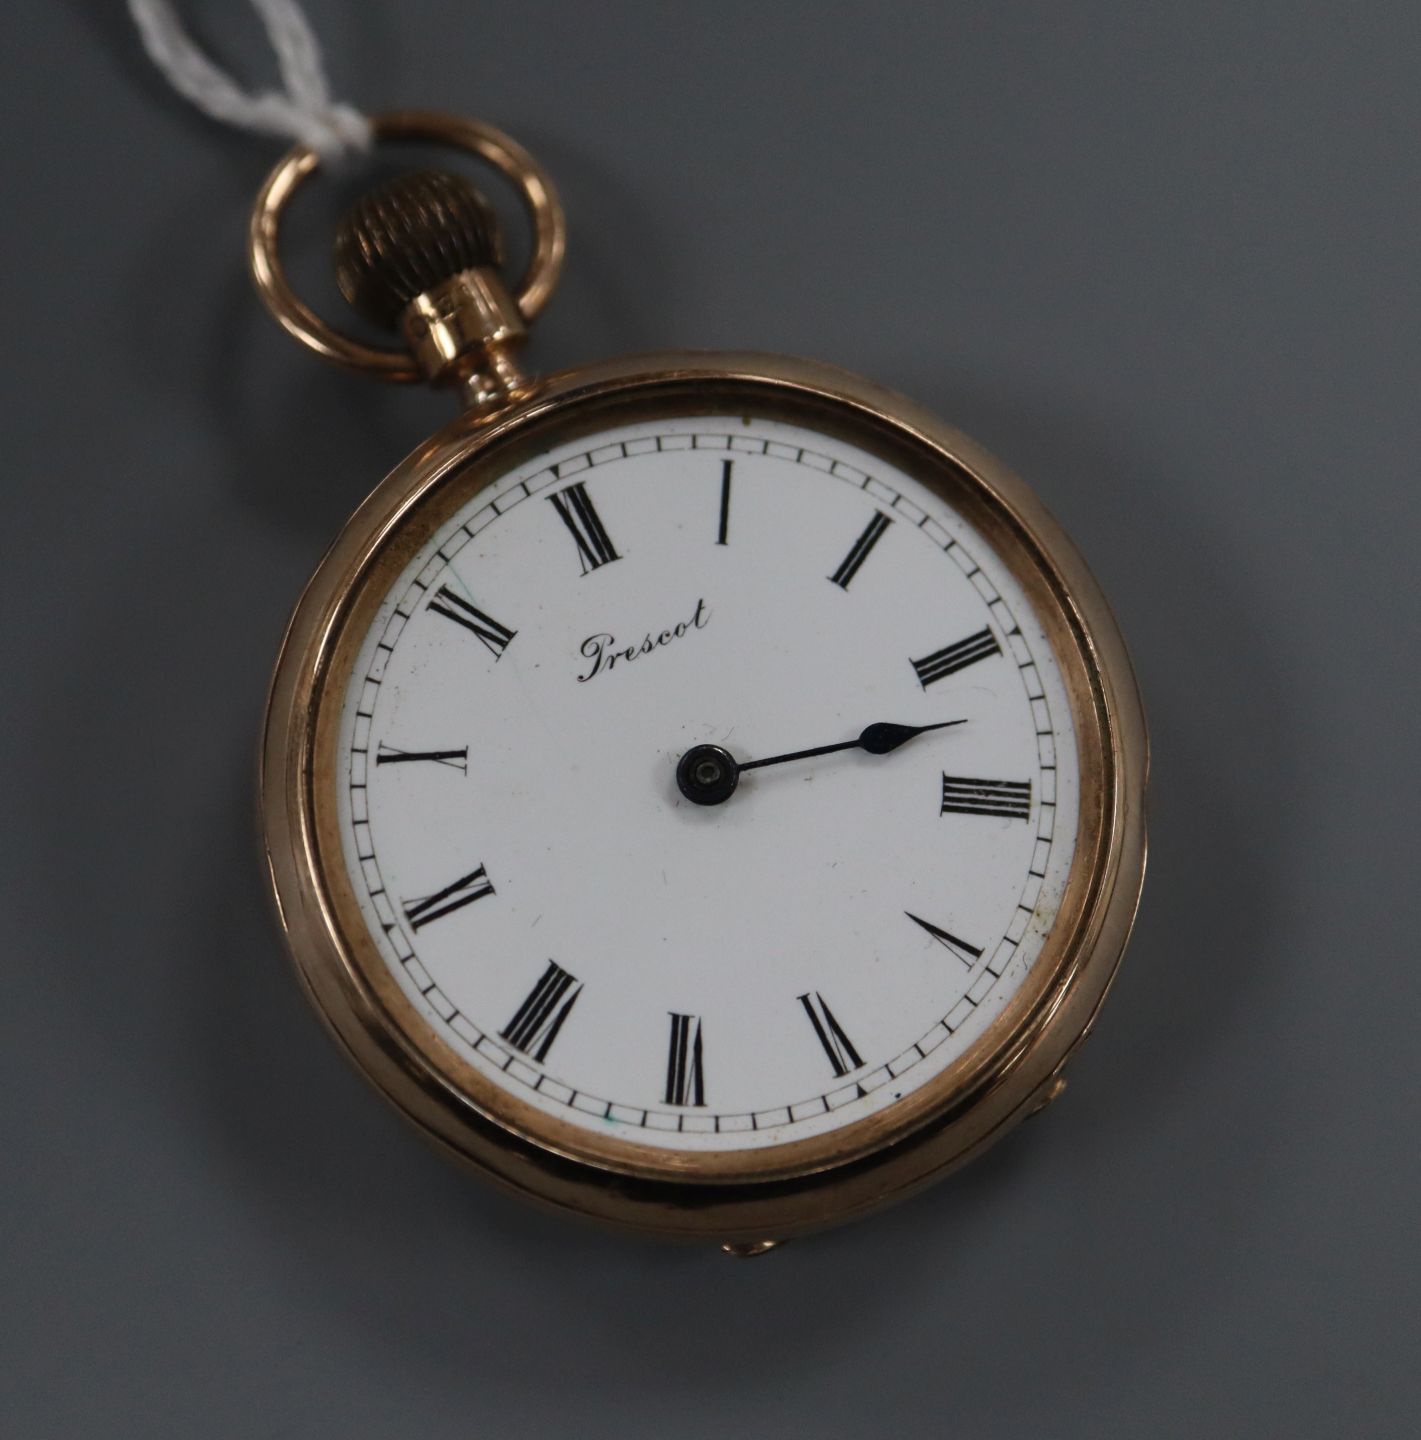 A ladys' 9ct gold open face fob watch, Lancashire watch company